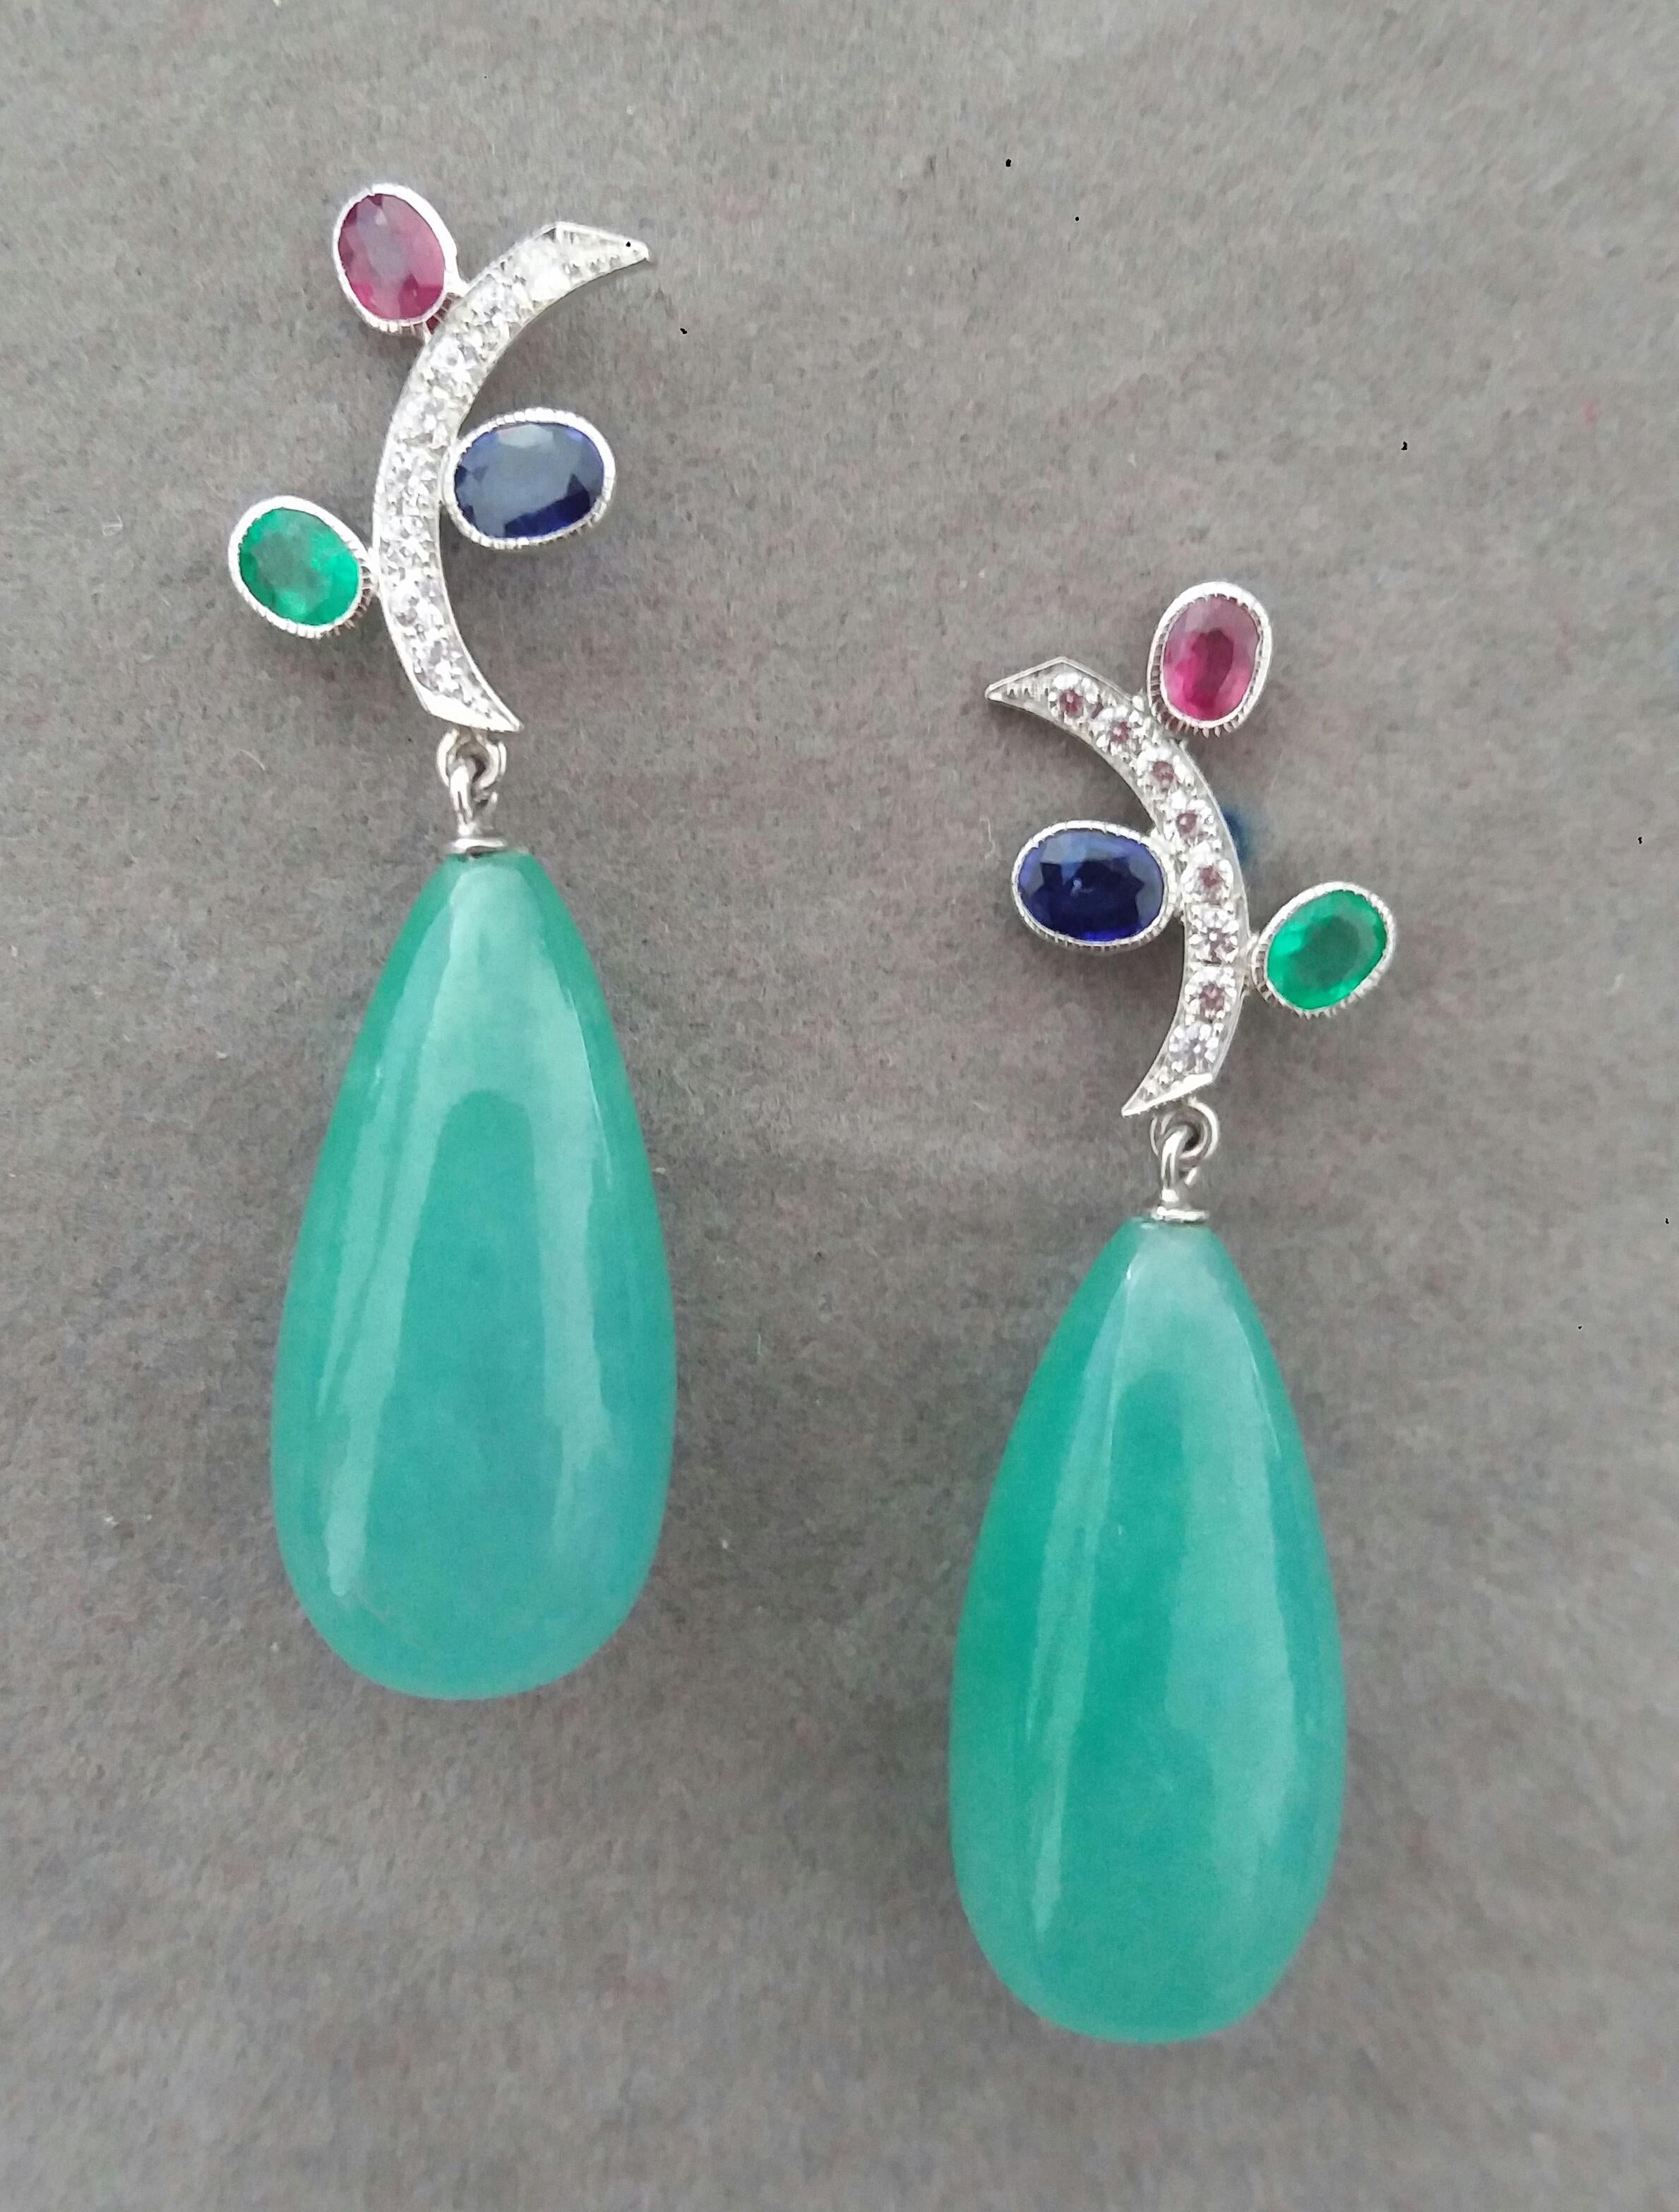 In these classic Tutti Frutti Style earrings the tops are 2 White Gold and Diamonds  Branches, 16 round full cut diamonds weighing 0,25 carats,and 3 pairs of faceted 4x5 mm. Rubies ,Emeralds and Blue Sapphires ,in the lower parts we have 2 Jade